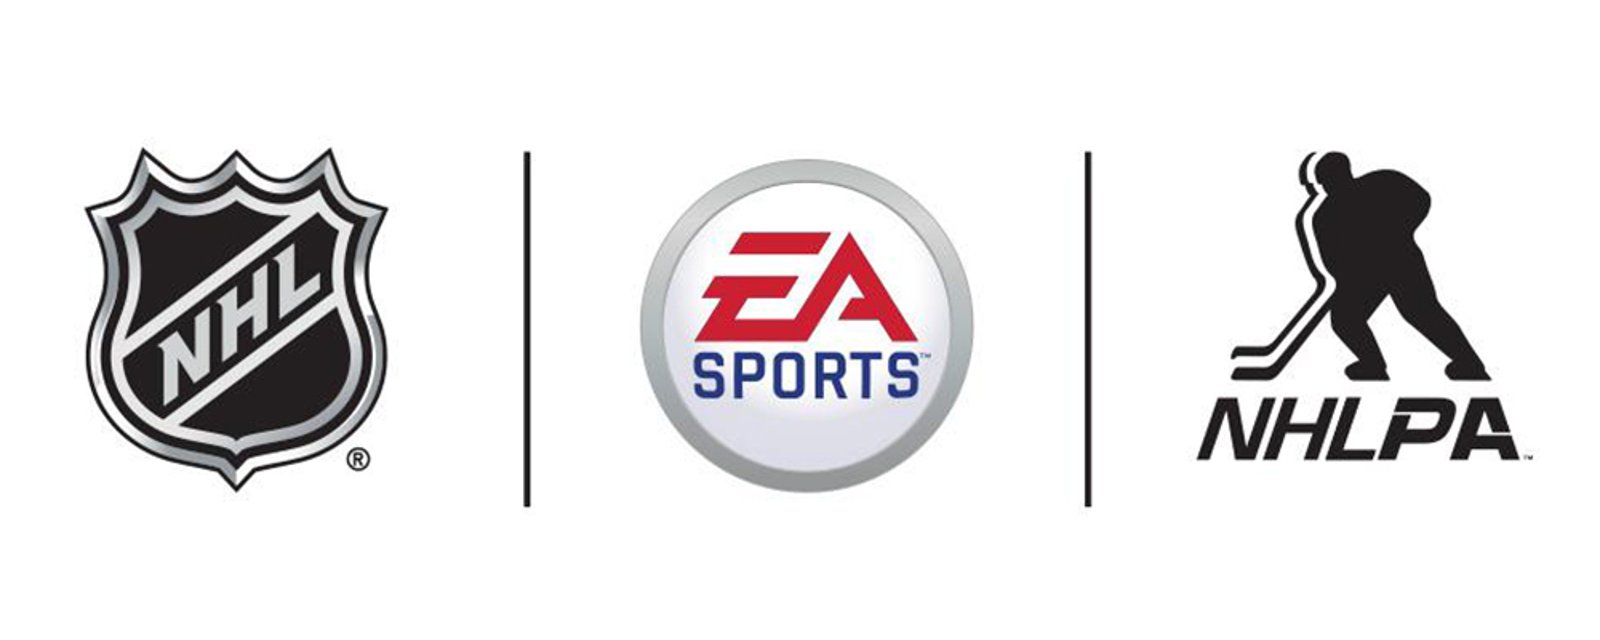 NHL and EA announce new partnership with respect to NHL game series